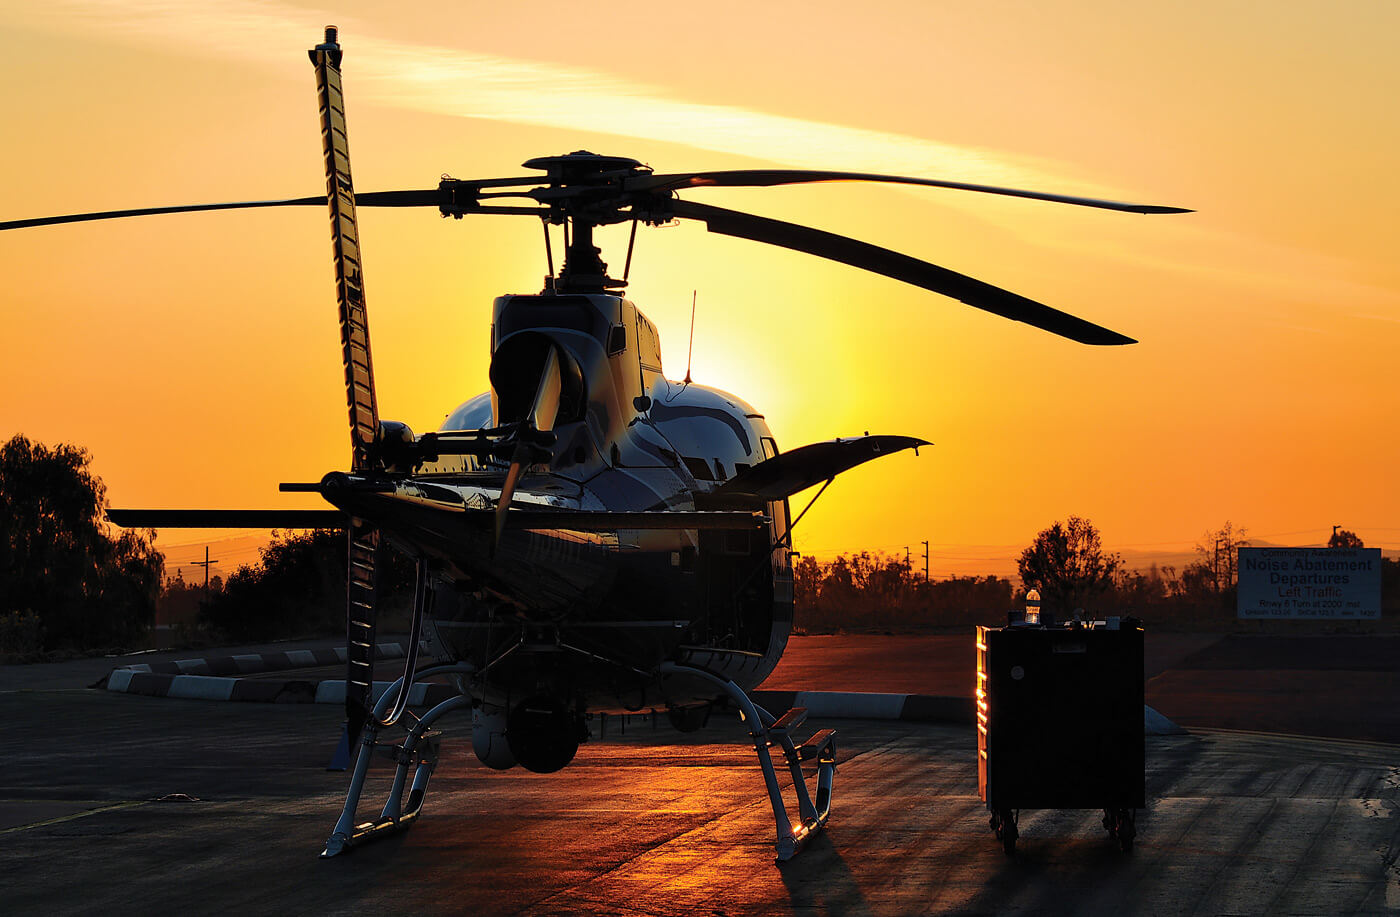 CNC Technologies designs, builds and installs best-of-breed airborne mission suites that connect multimedia-capturing helicopters with the ground.